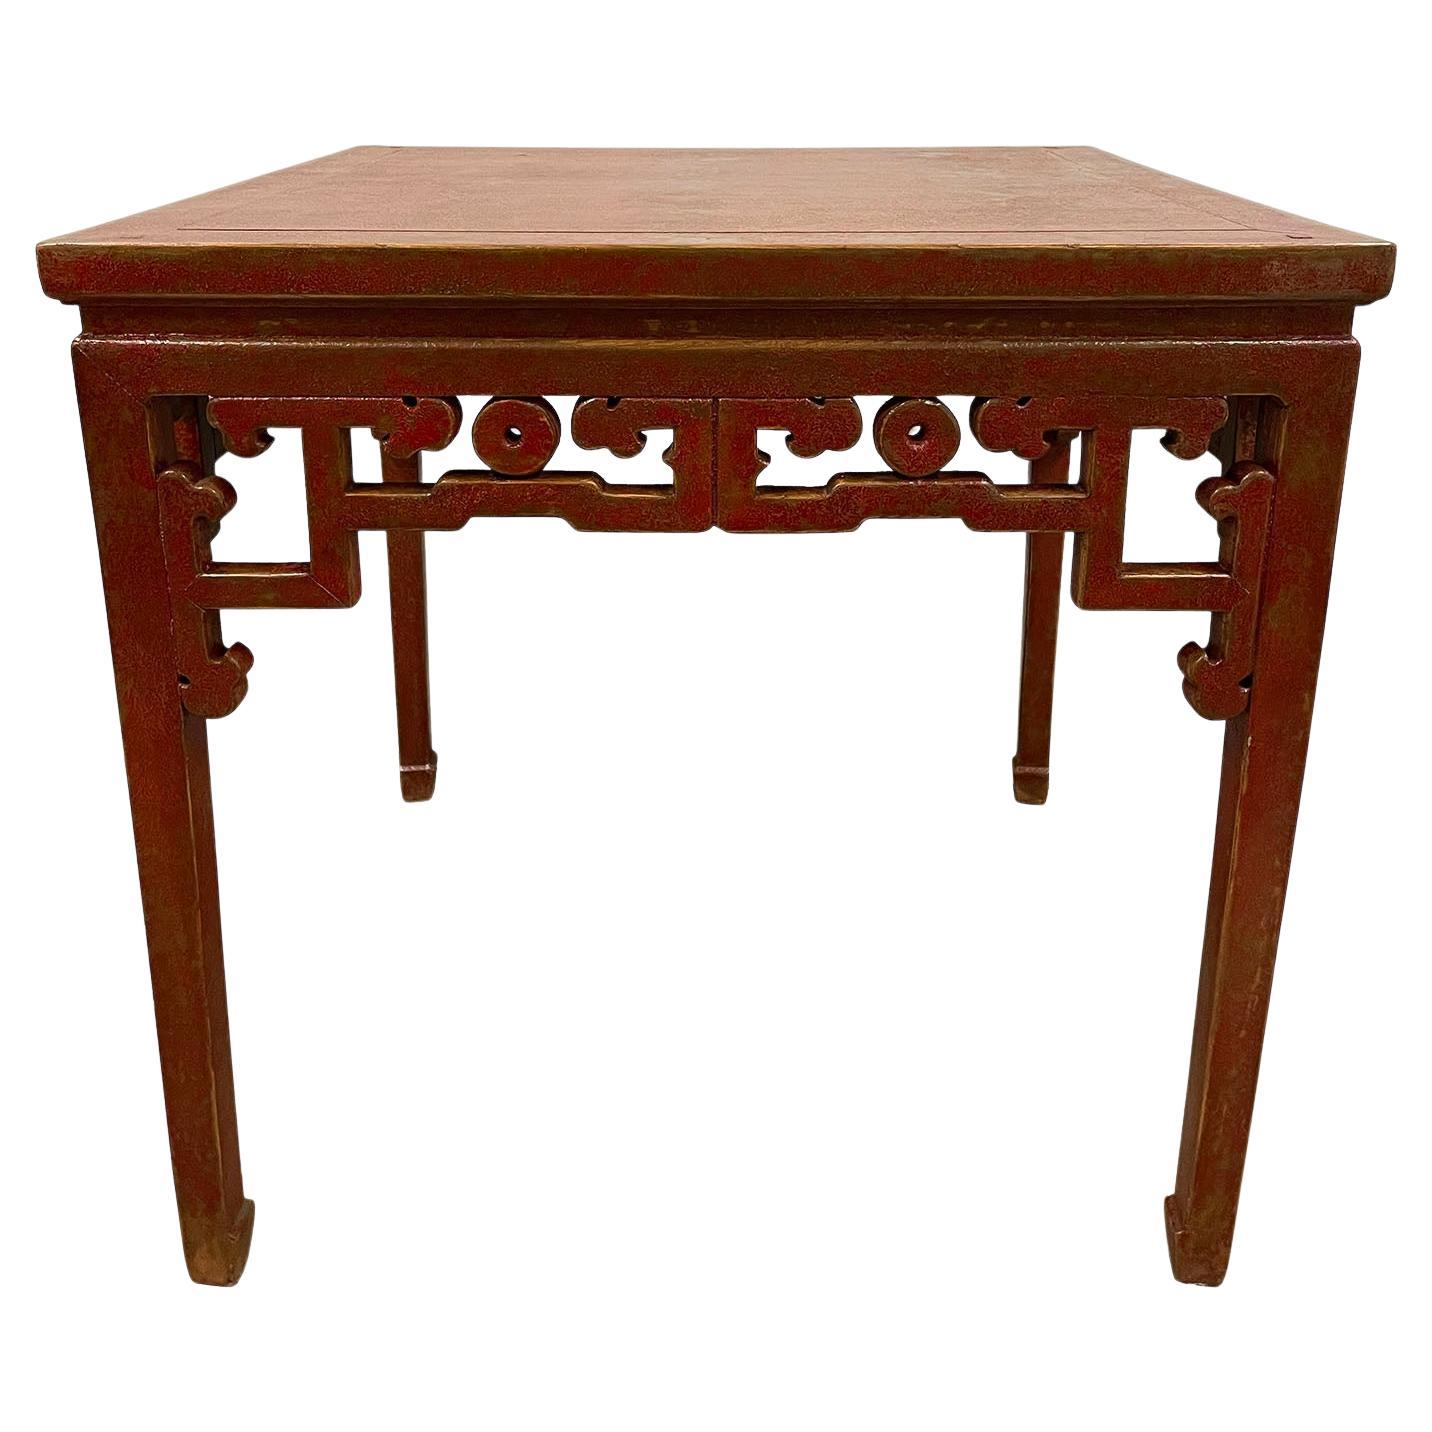 Mid-20th Century Chinese Red Lacquered Square Dining Table, "Ba Xian" Table For Sale